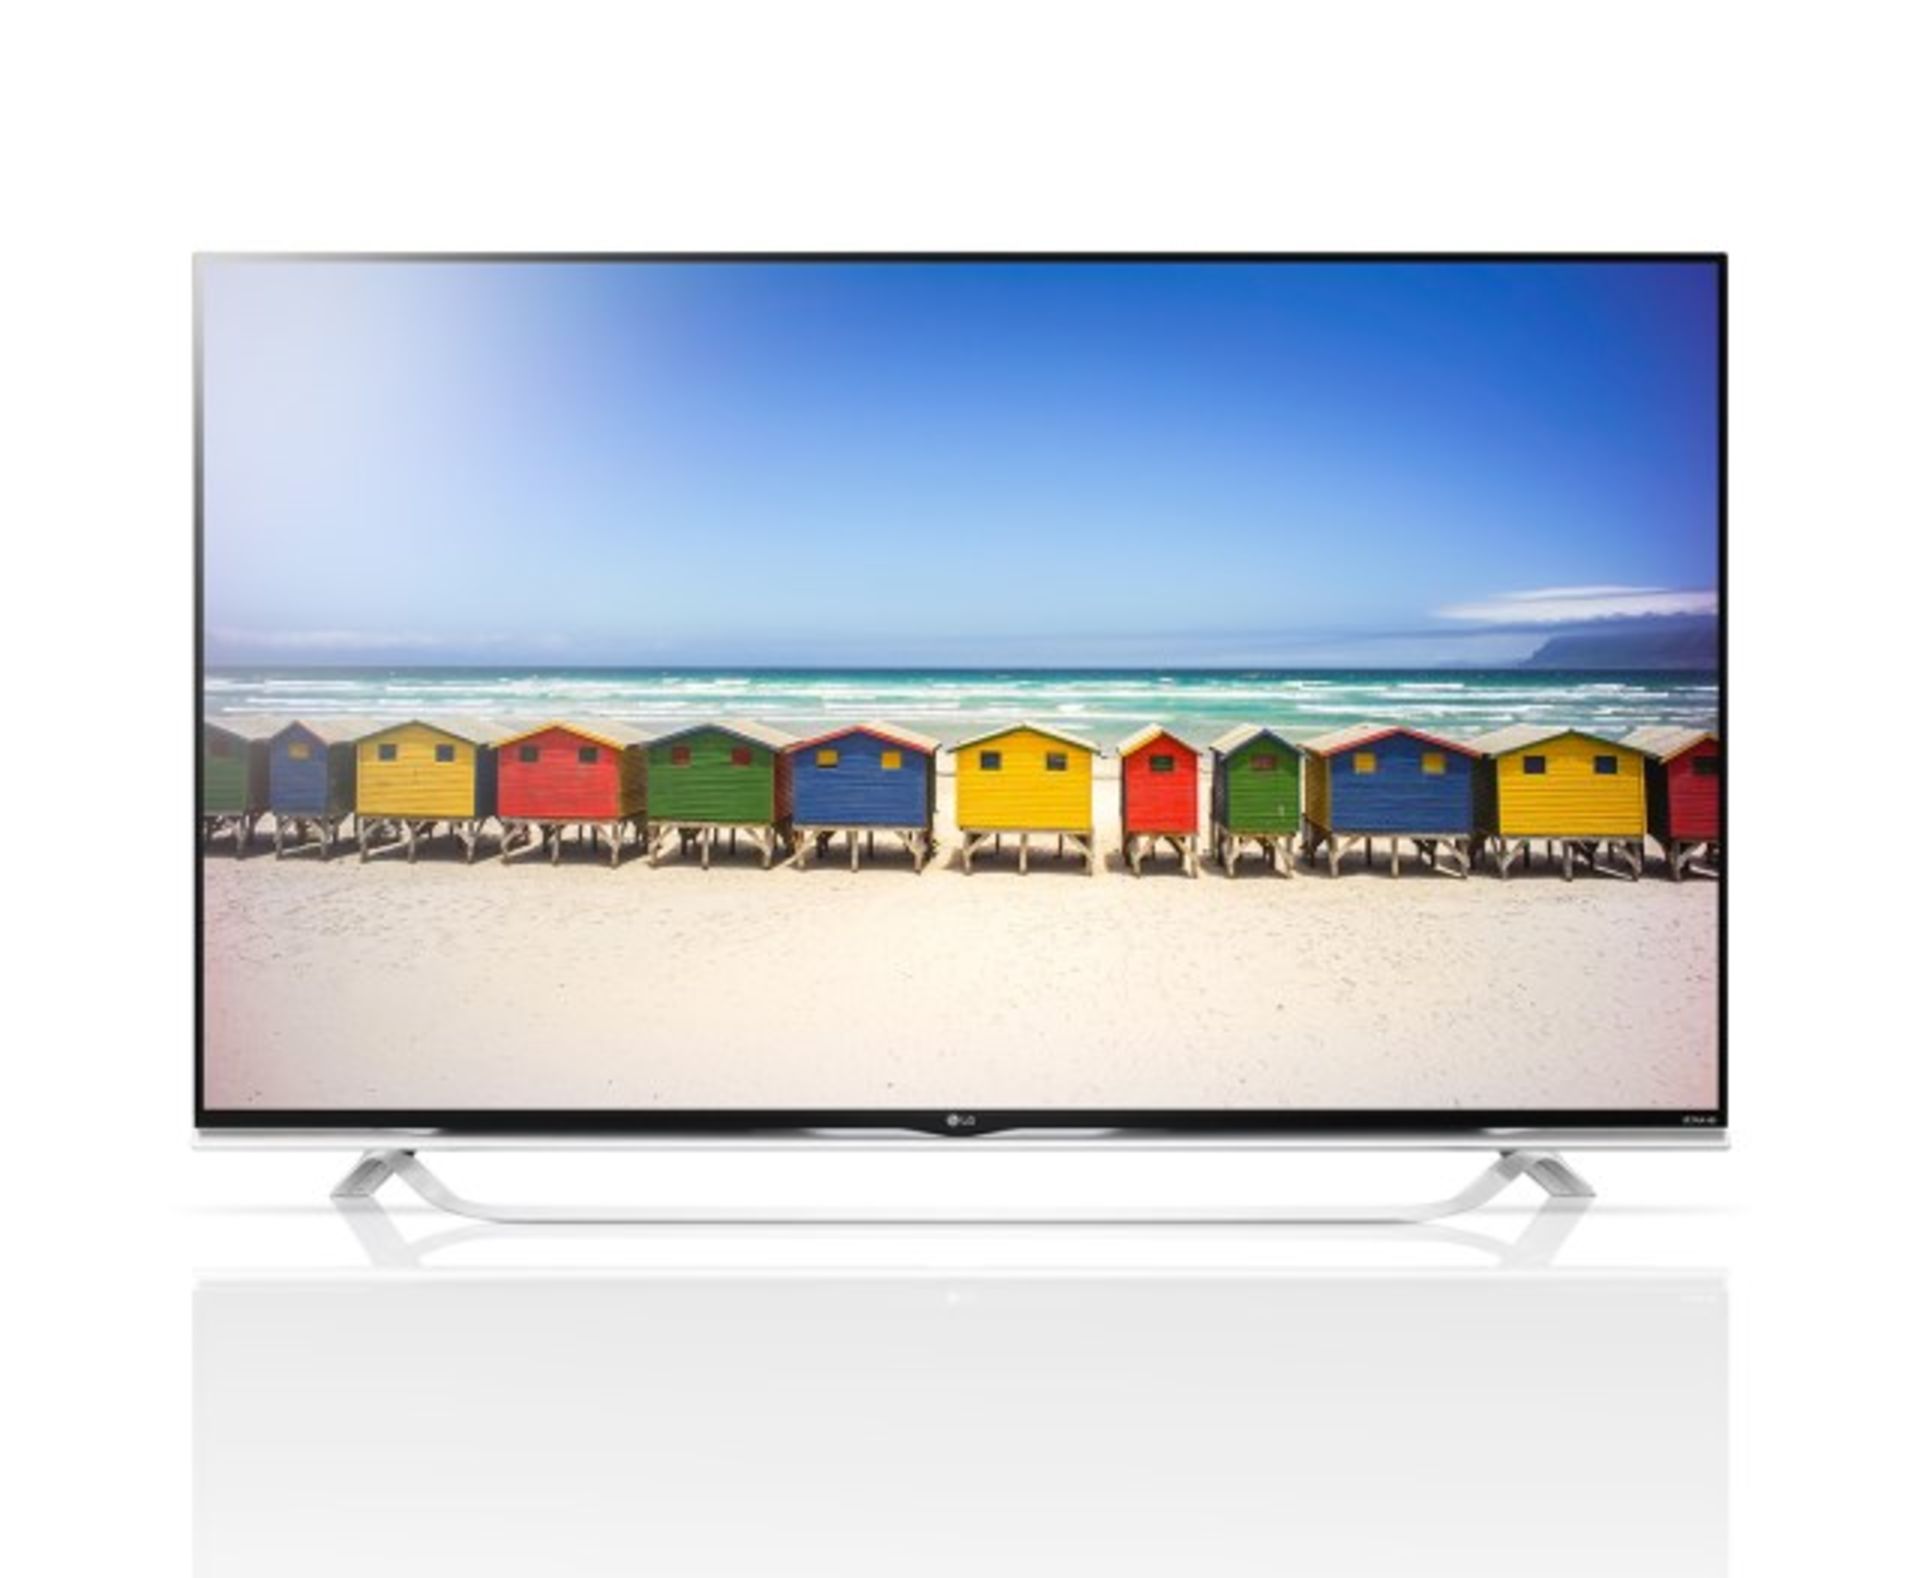 V Grade A 65UF8529 LG 65" 3D 4K Ultra HD Widescreen Smart LED TV With Freeview HD - WiFi - WebOS